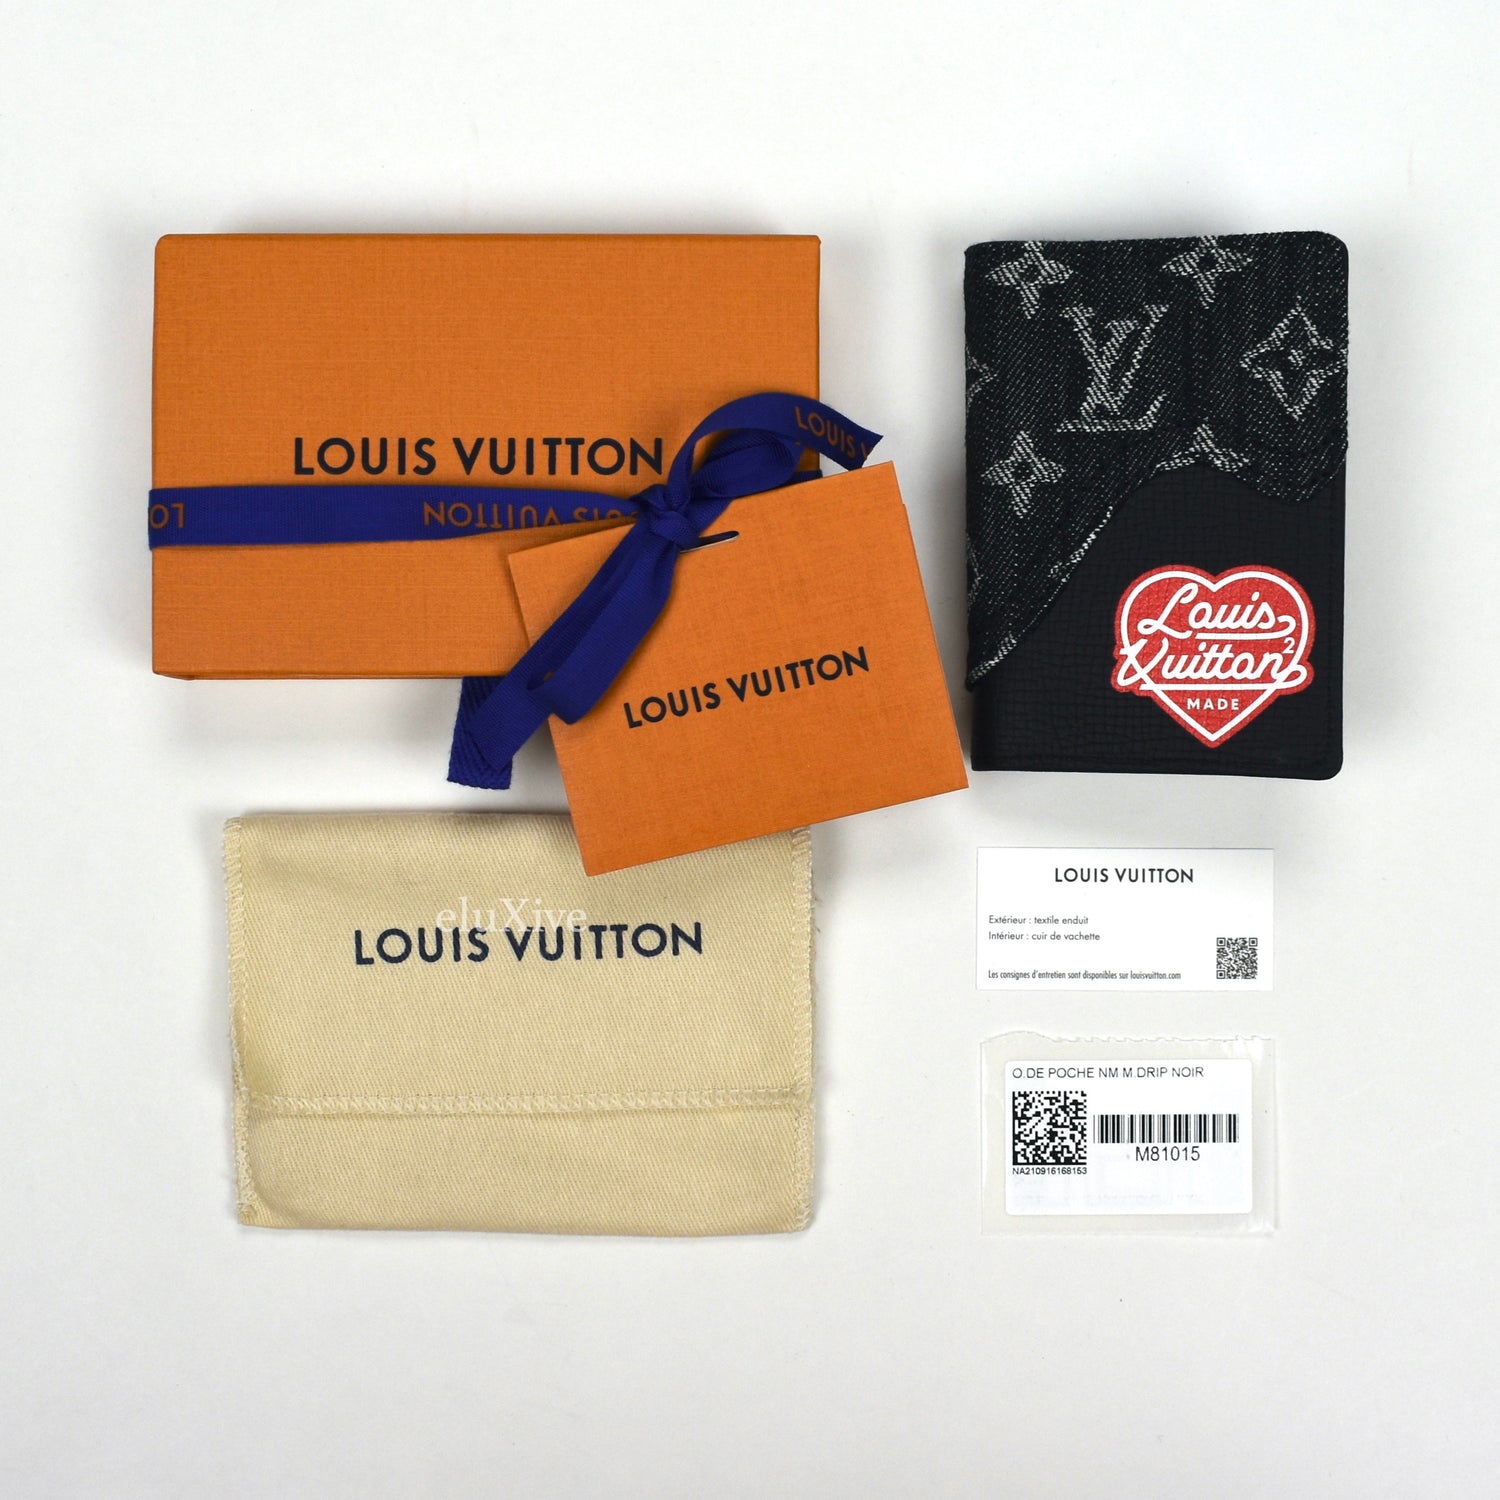 Take a look at the full Louis Vuitton LV2 x NIGO lookbook in the gallery  just below